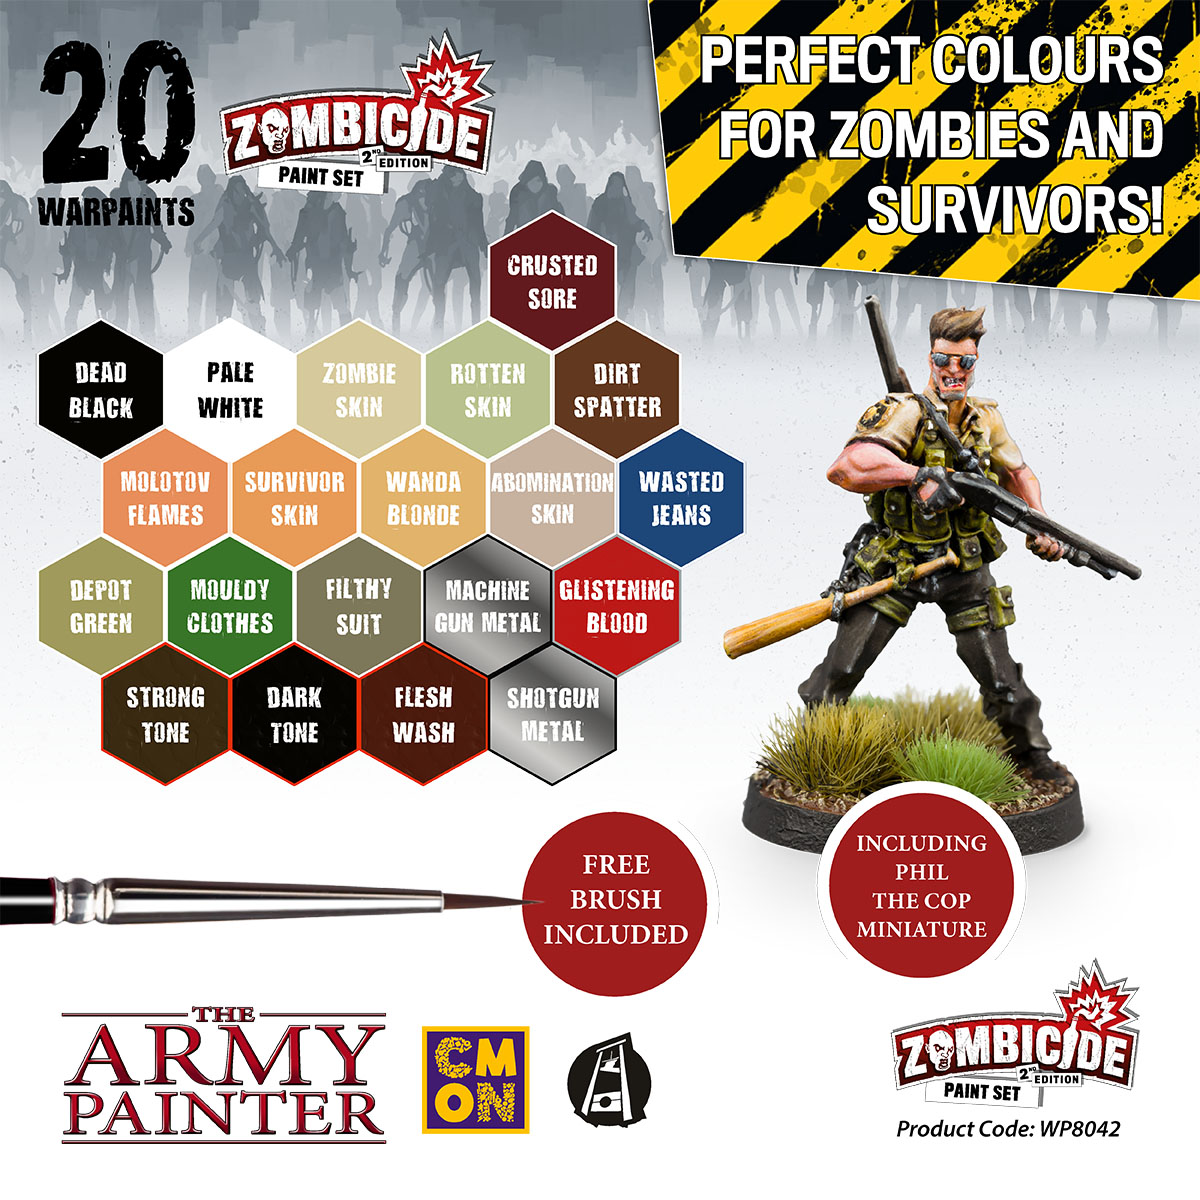 Review: Zombicide 2nd Edition Paint Set by The Army Painter